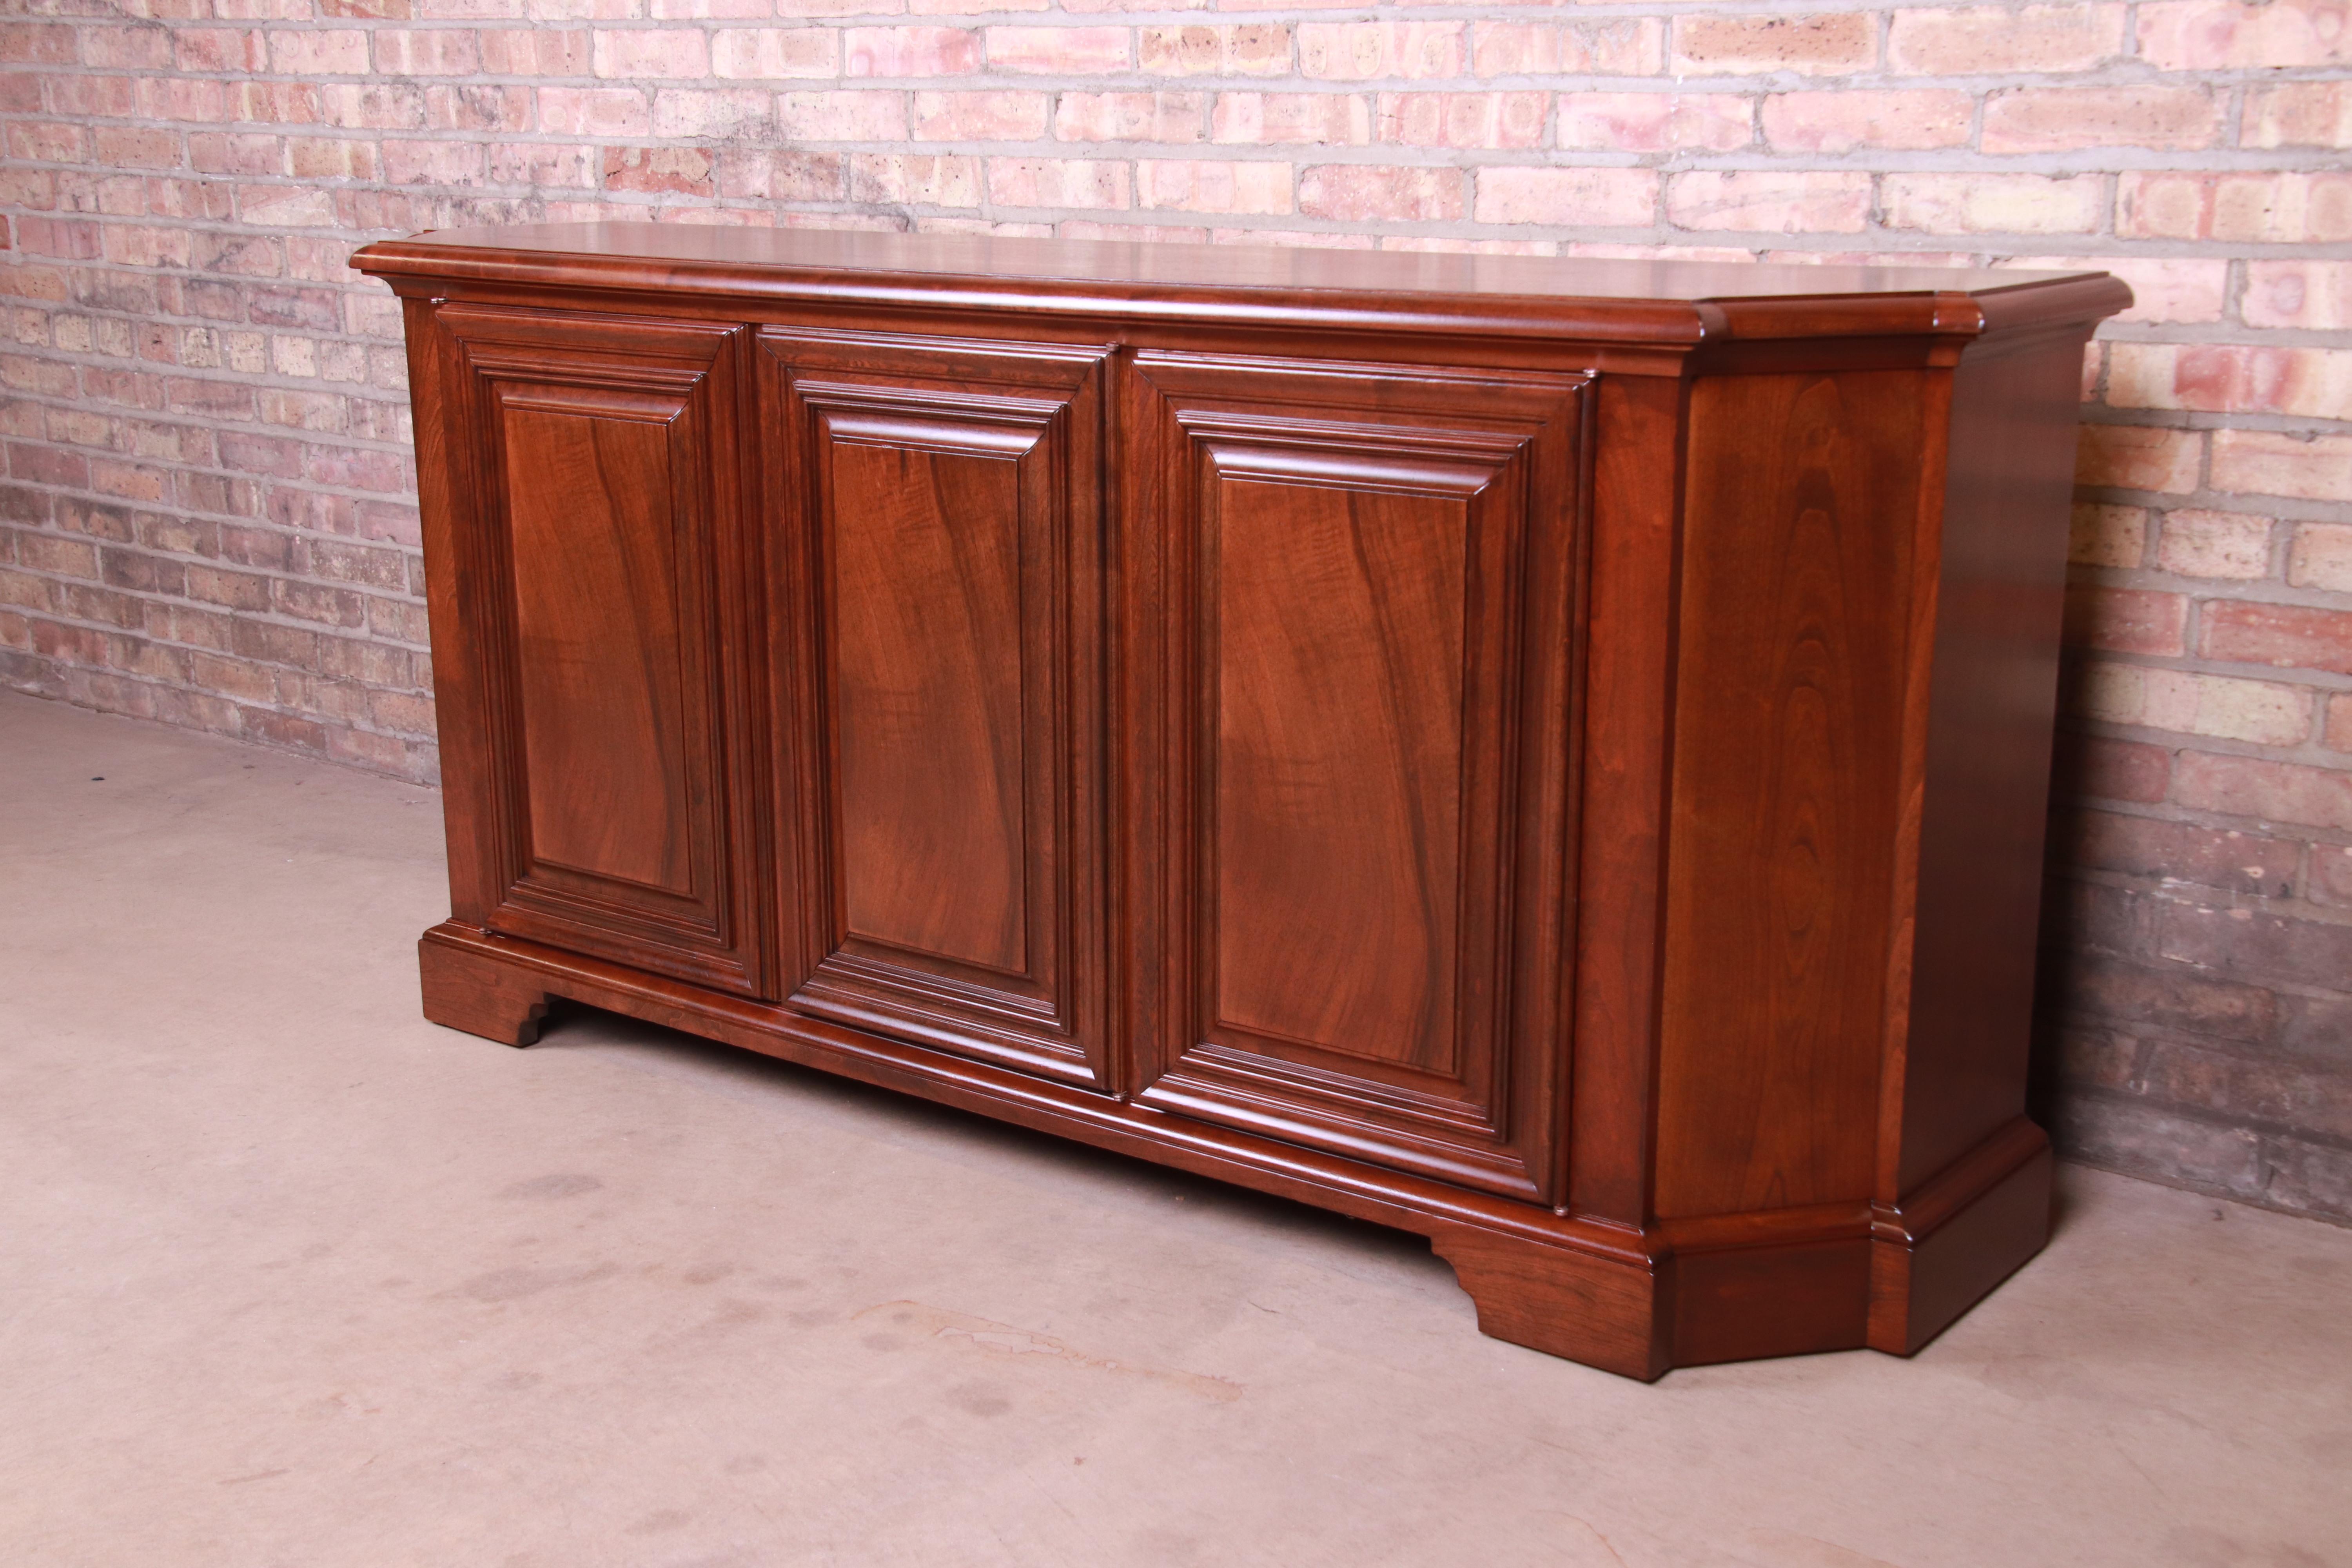 French Provincial Baker Furniture French Regency Walnut Sideboard or Bar Cabinet, Newly Refinished